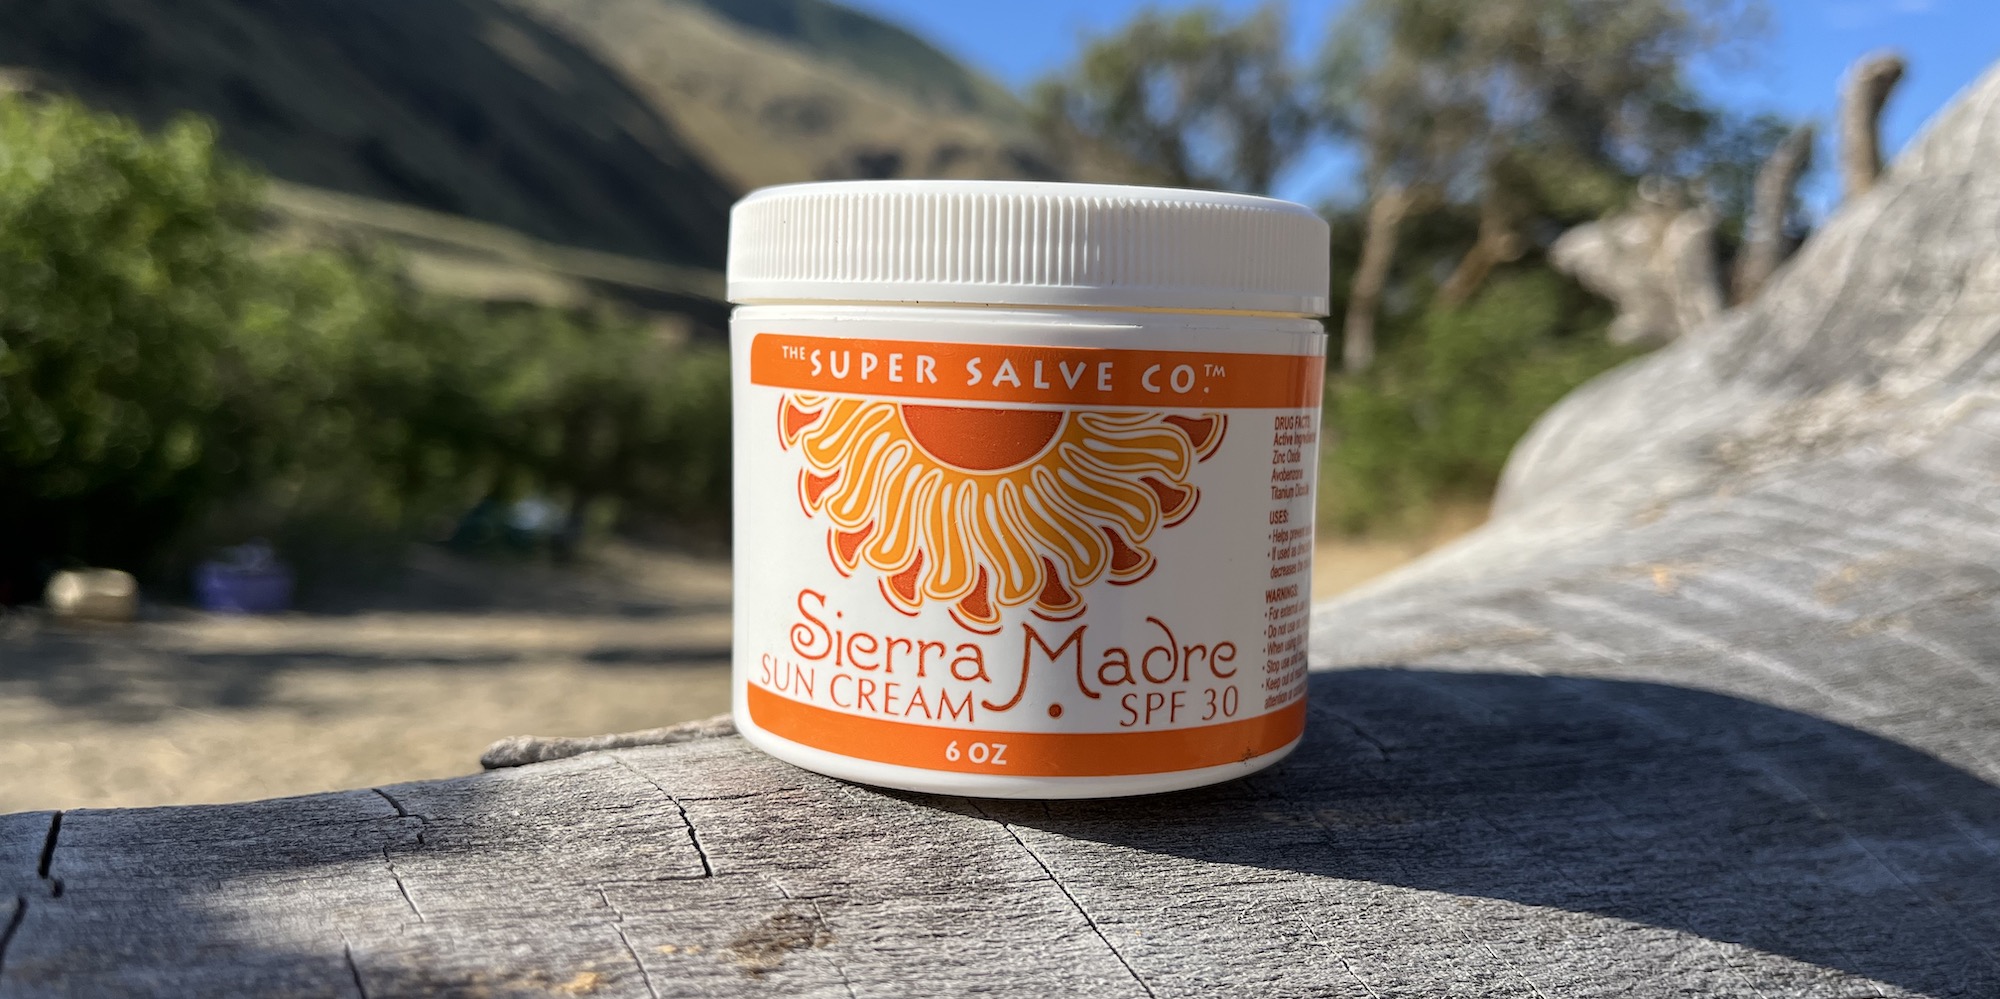 Sierra Madre super salve sunscreen resting on a log on a sunny day